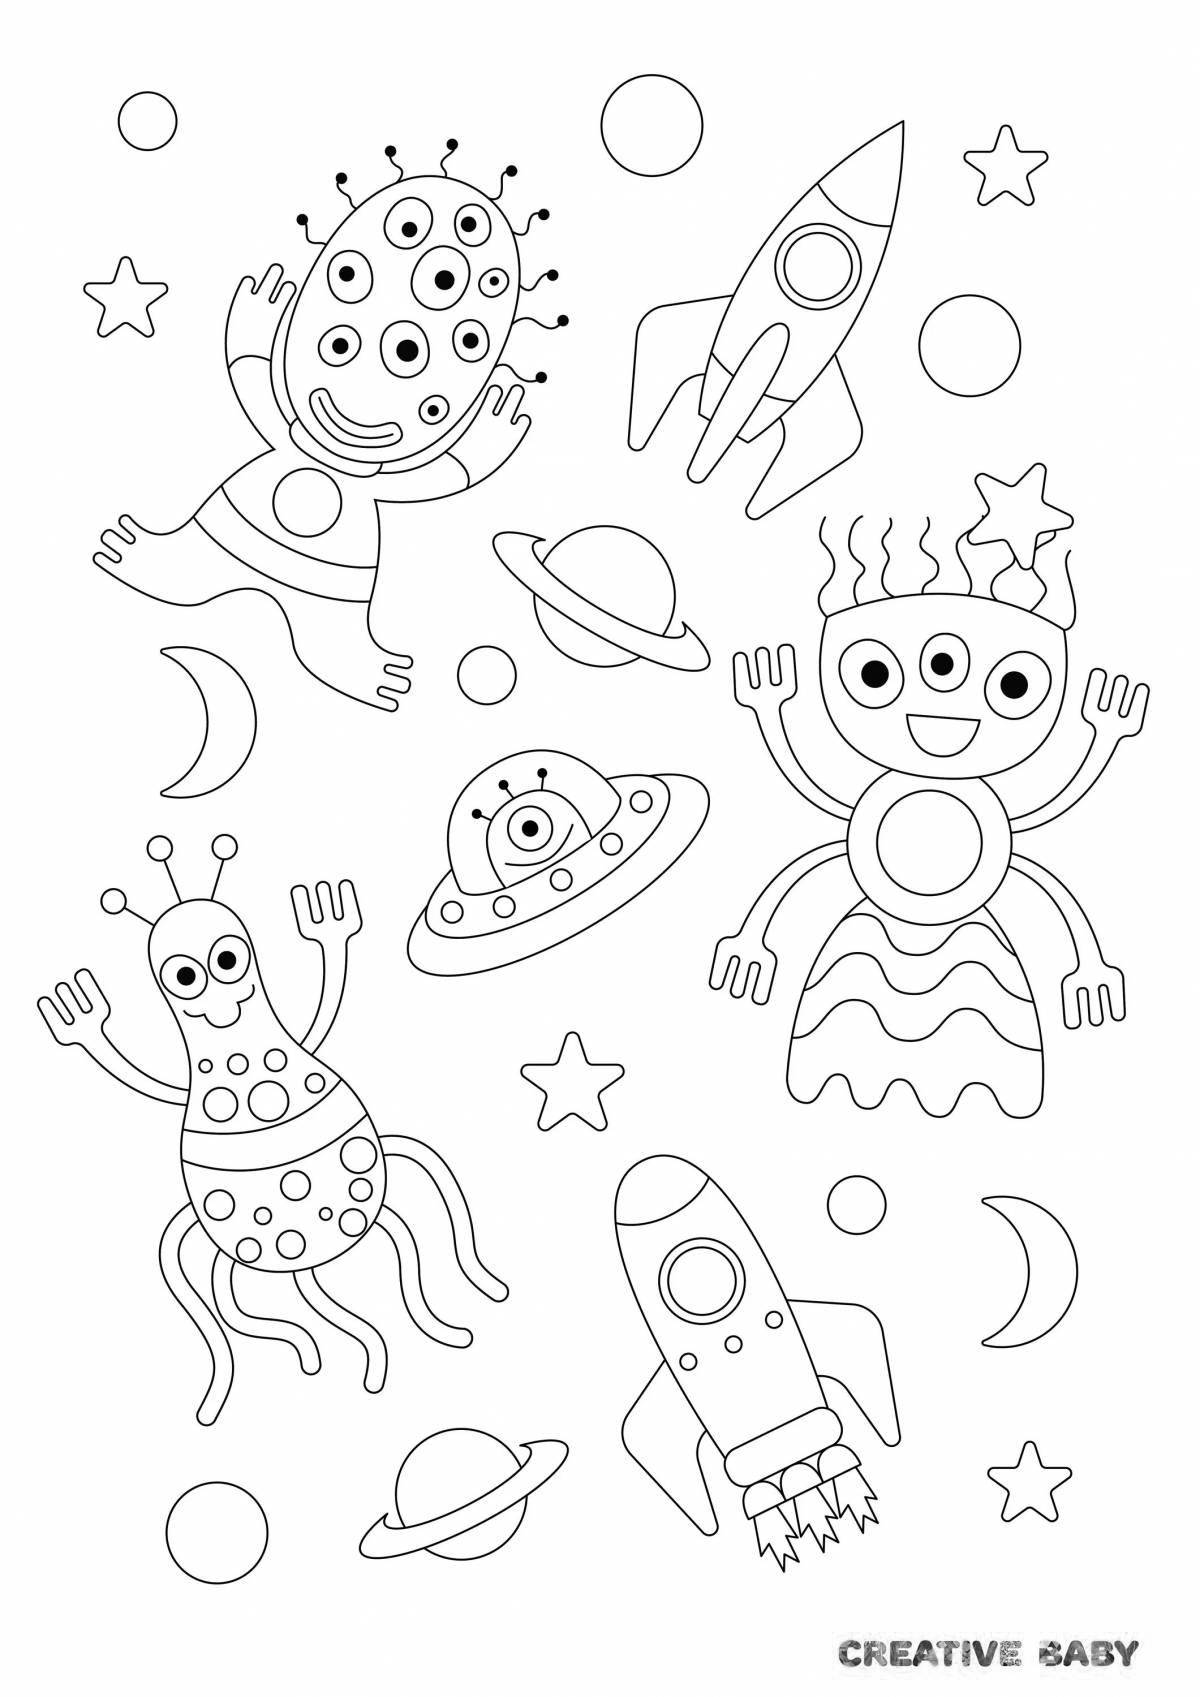 Color-fiesta aliens coloring page for kids